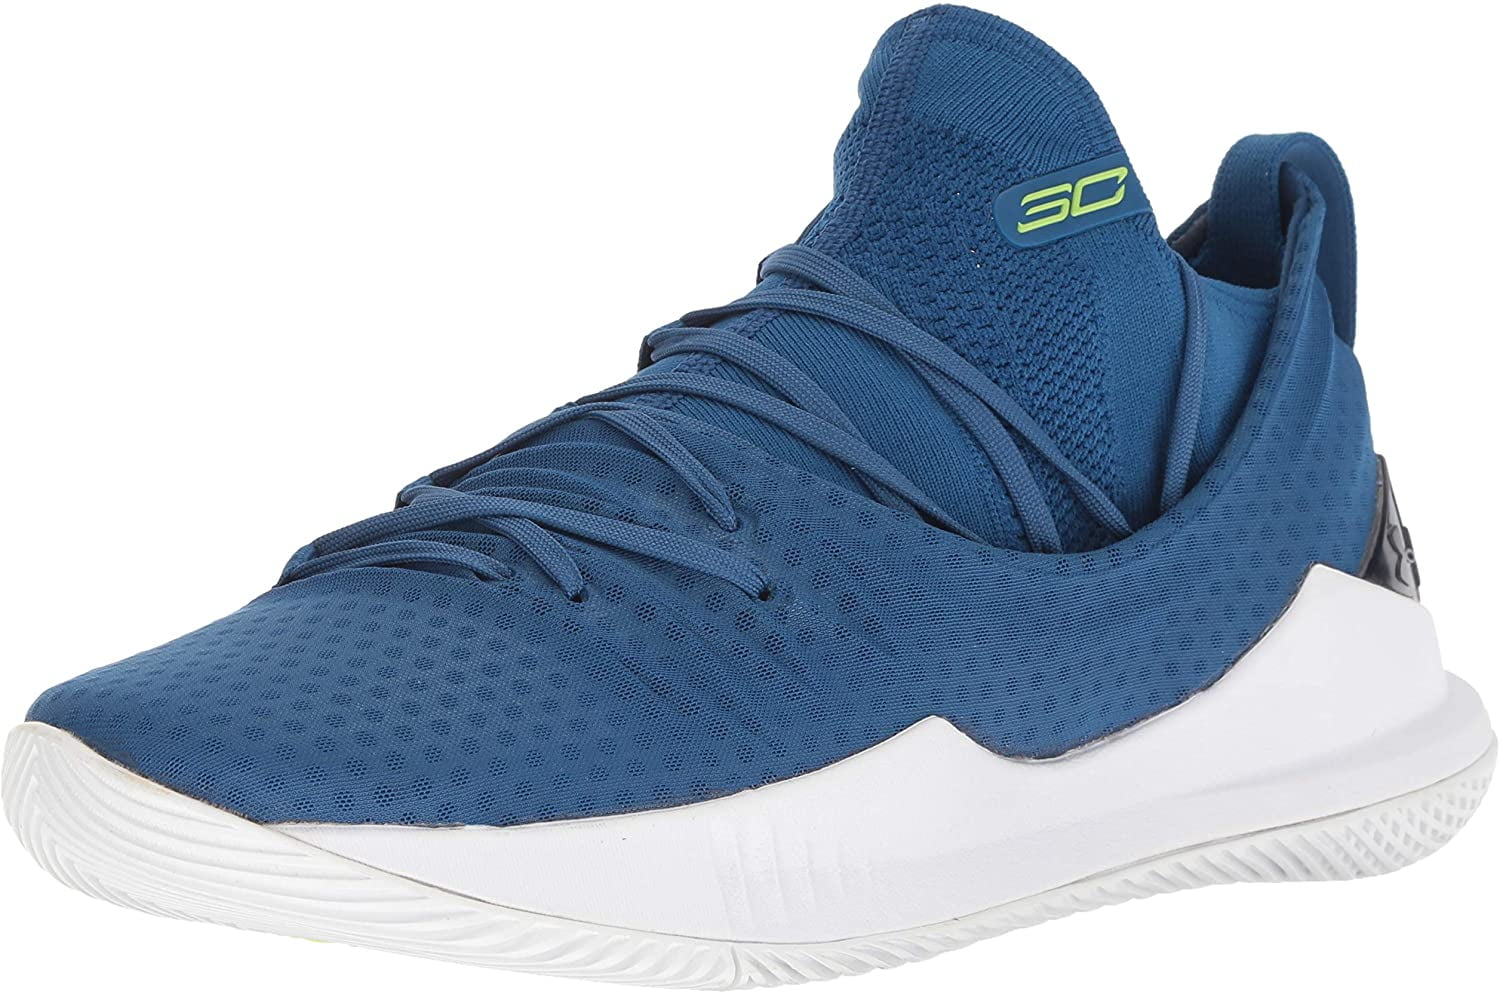 curry 5 white blue